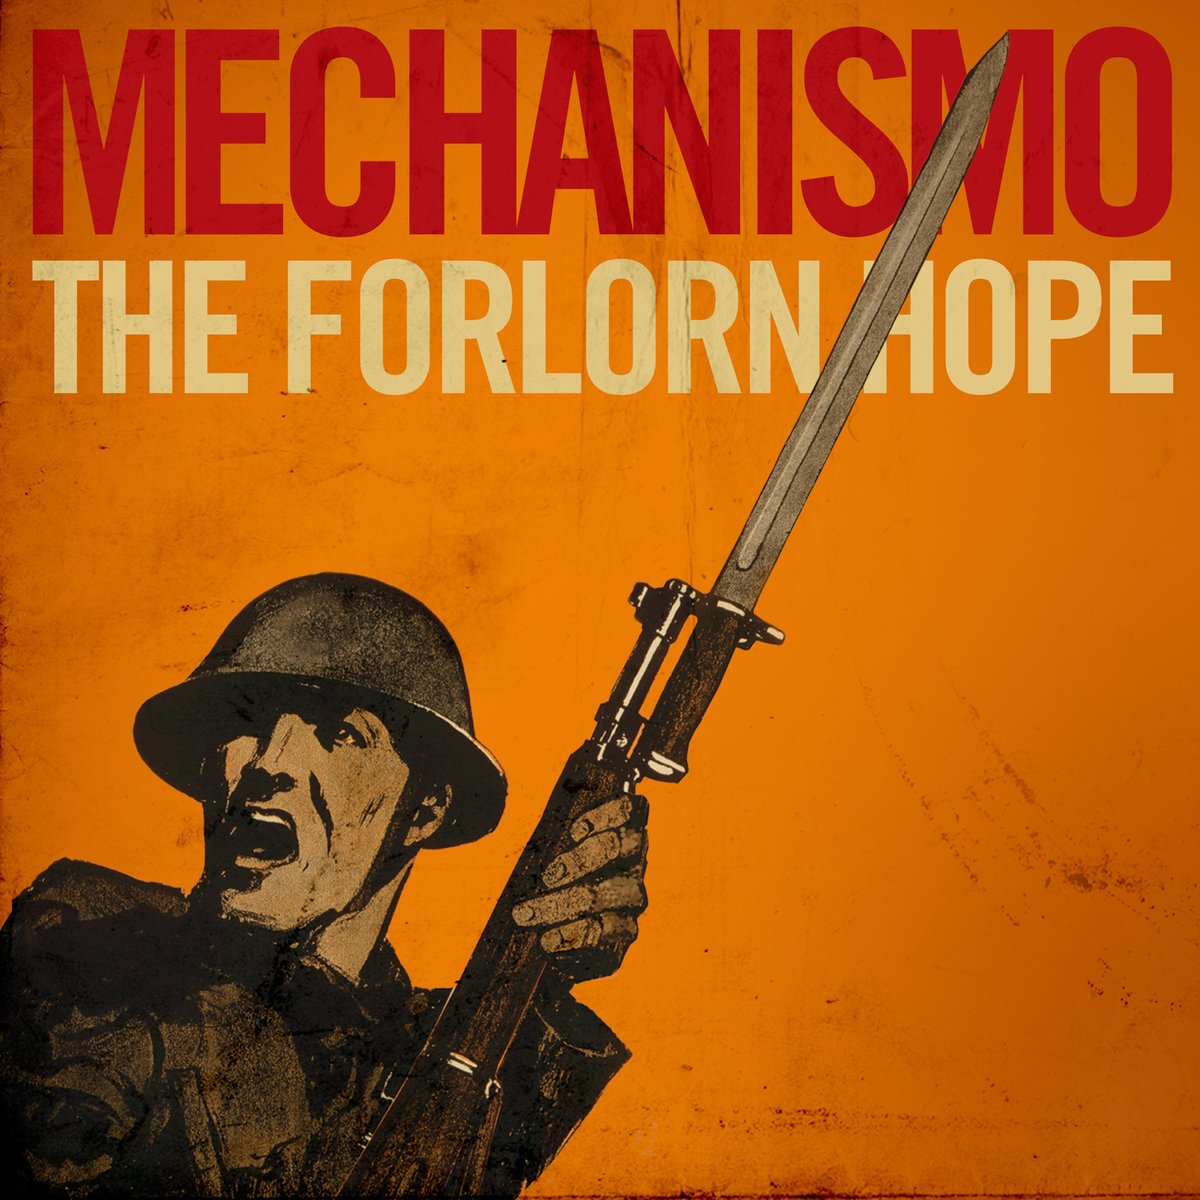 Mechanismo - The Forlorn Hope (2016) FLAC Download